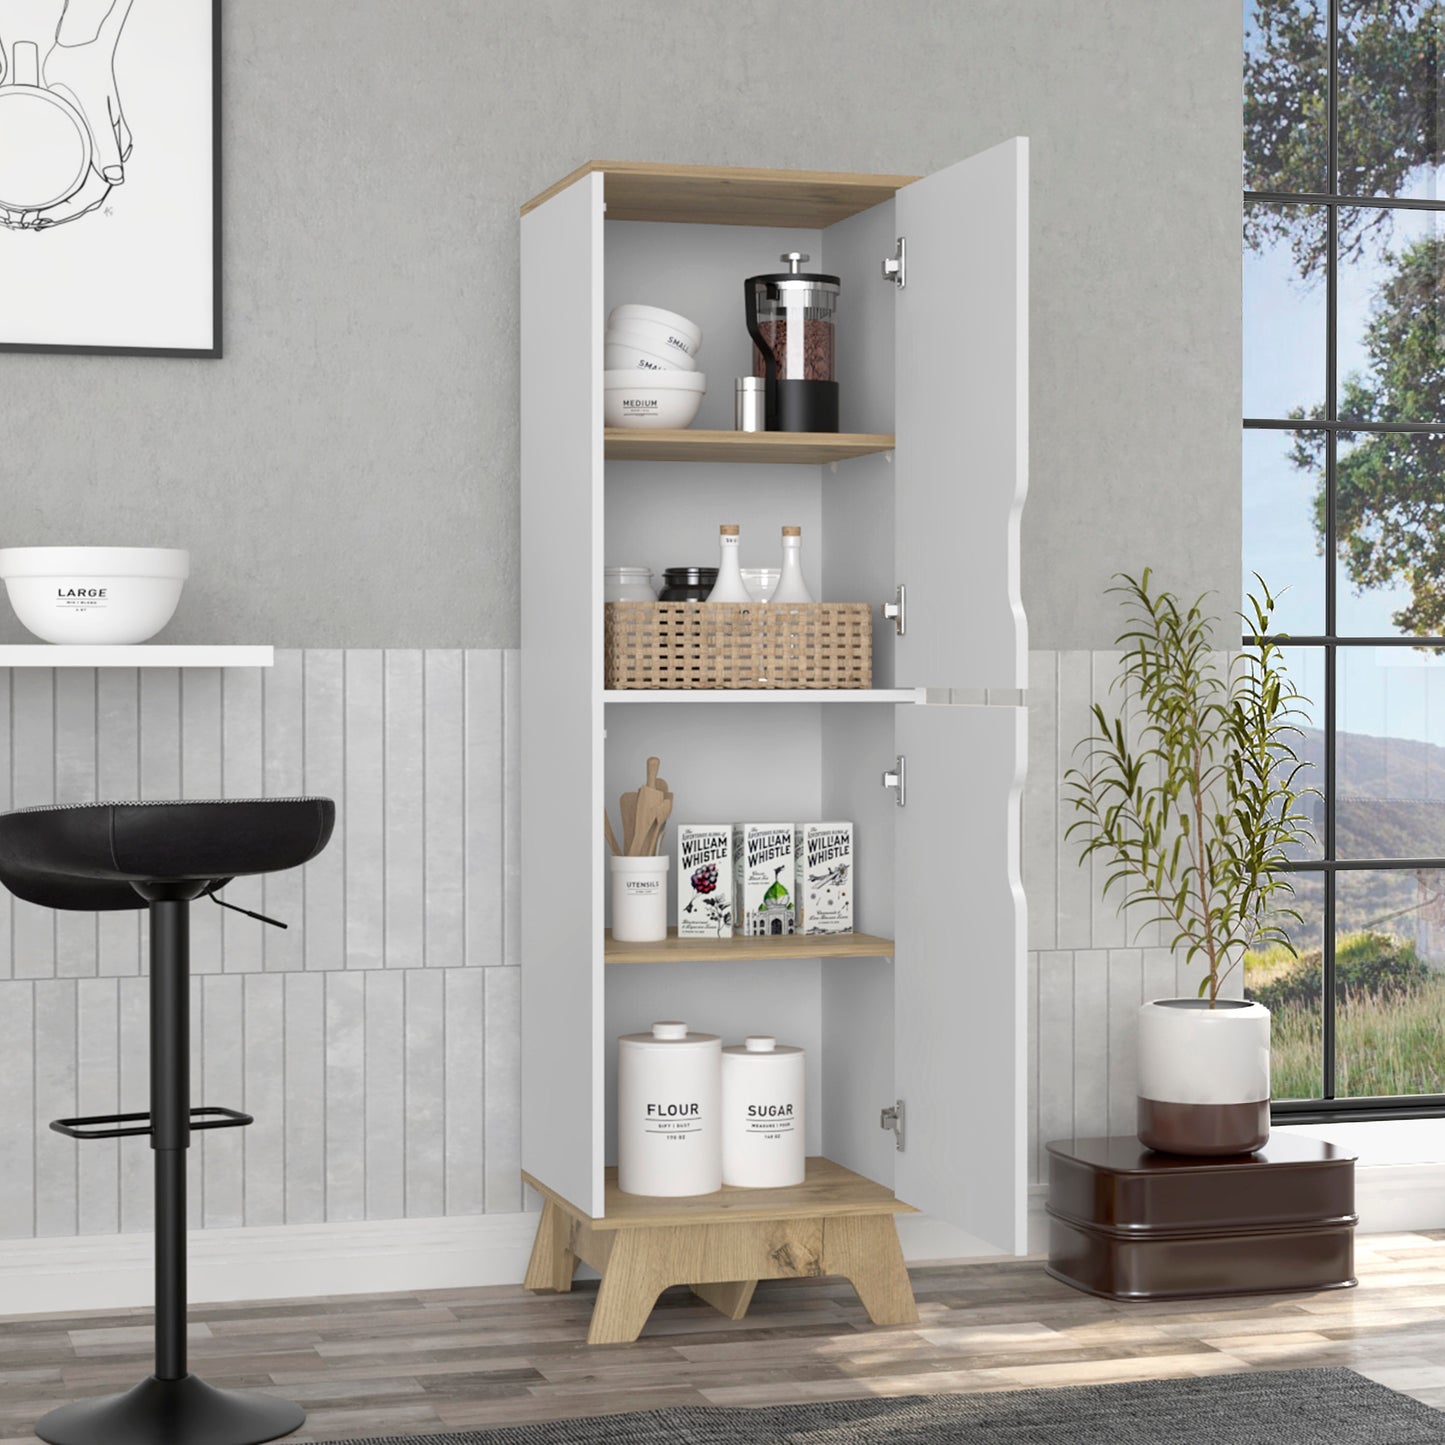 Top Pantry Cabinet